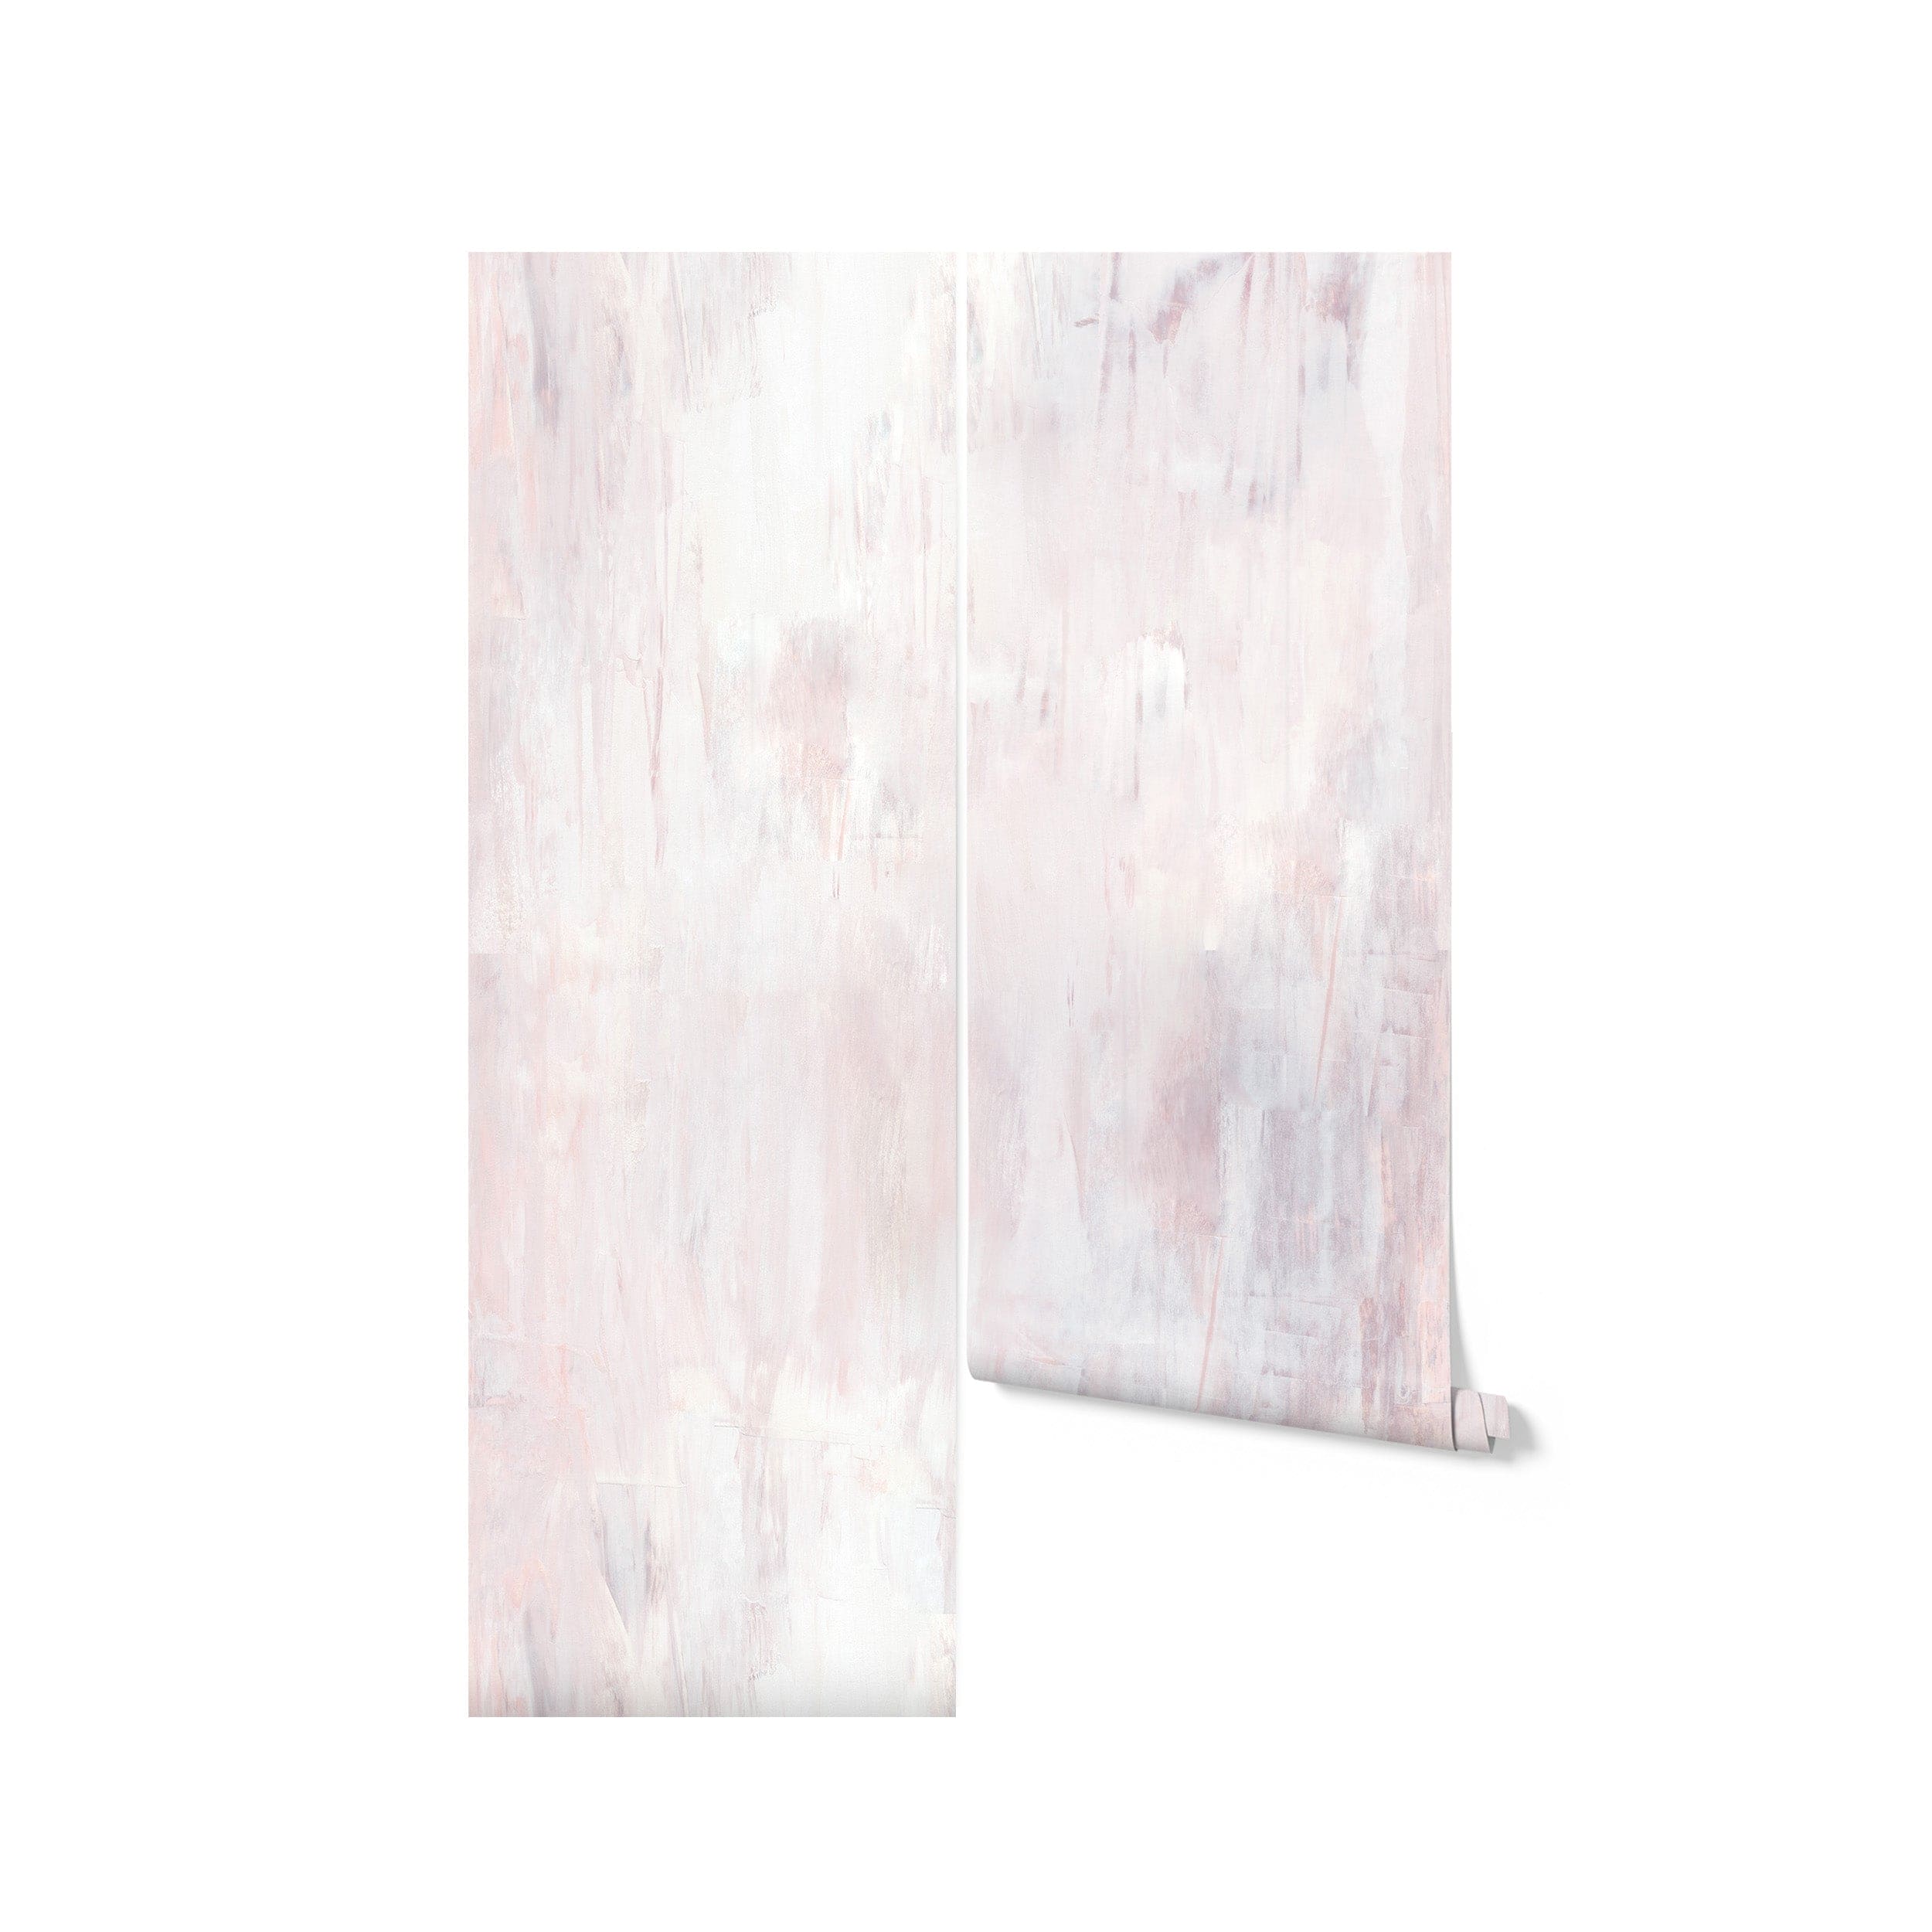 A roll of Paint Texture Wallpaper IV in pink, partially unrolled to reveal a gentle, artistic brushstroke texture, suggesting a hand-painted effect and soft color variation.